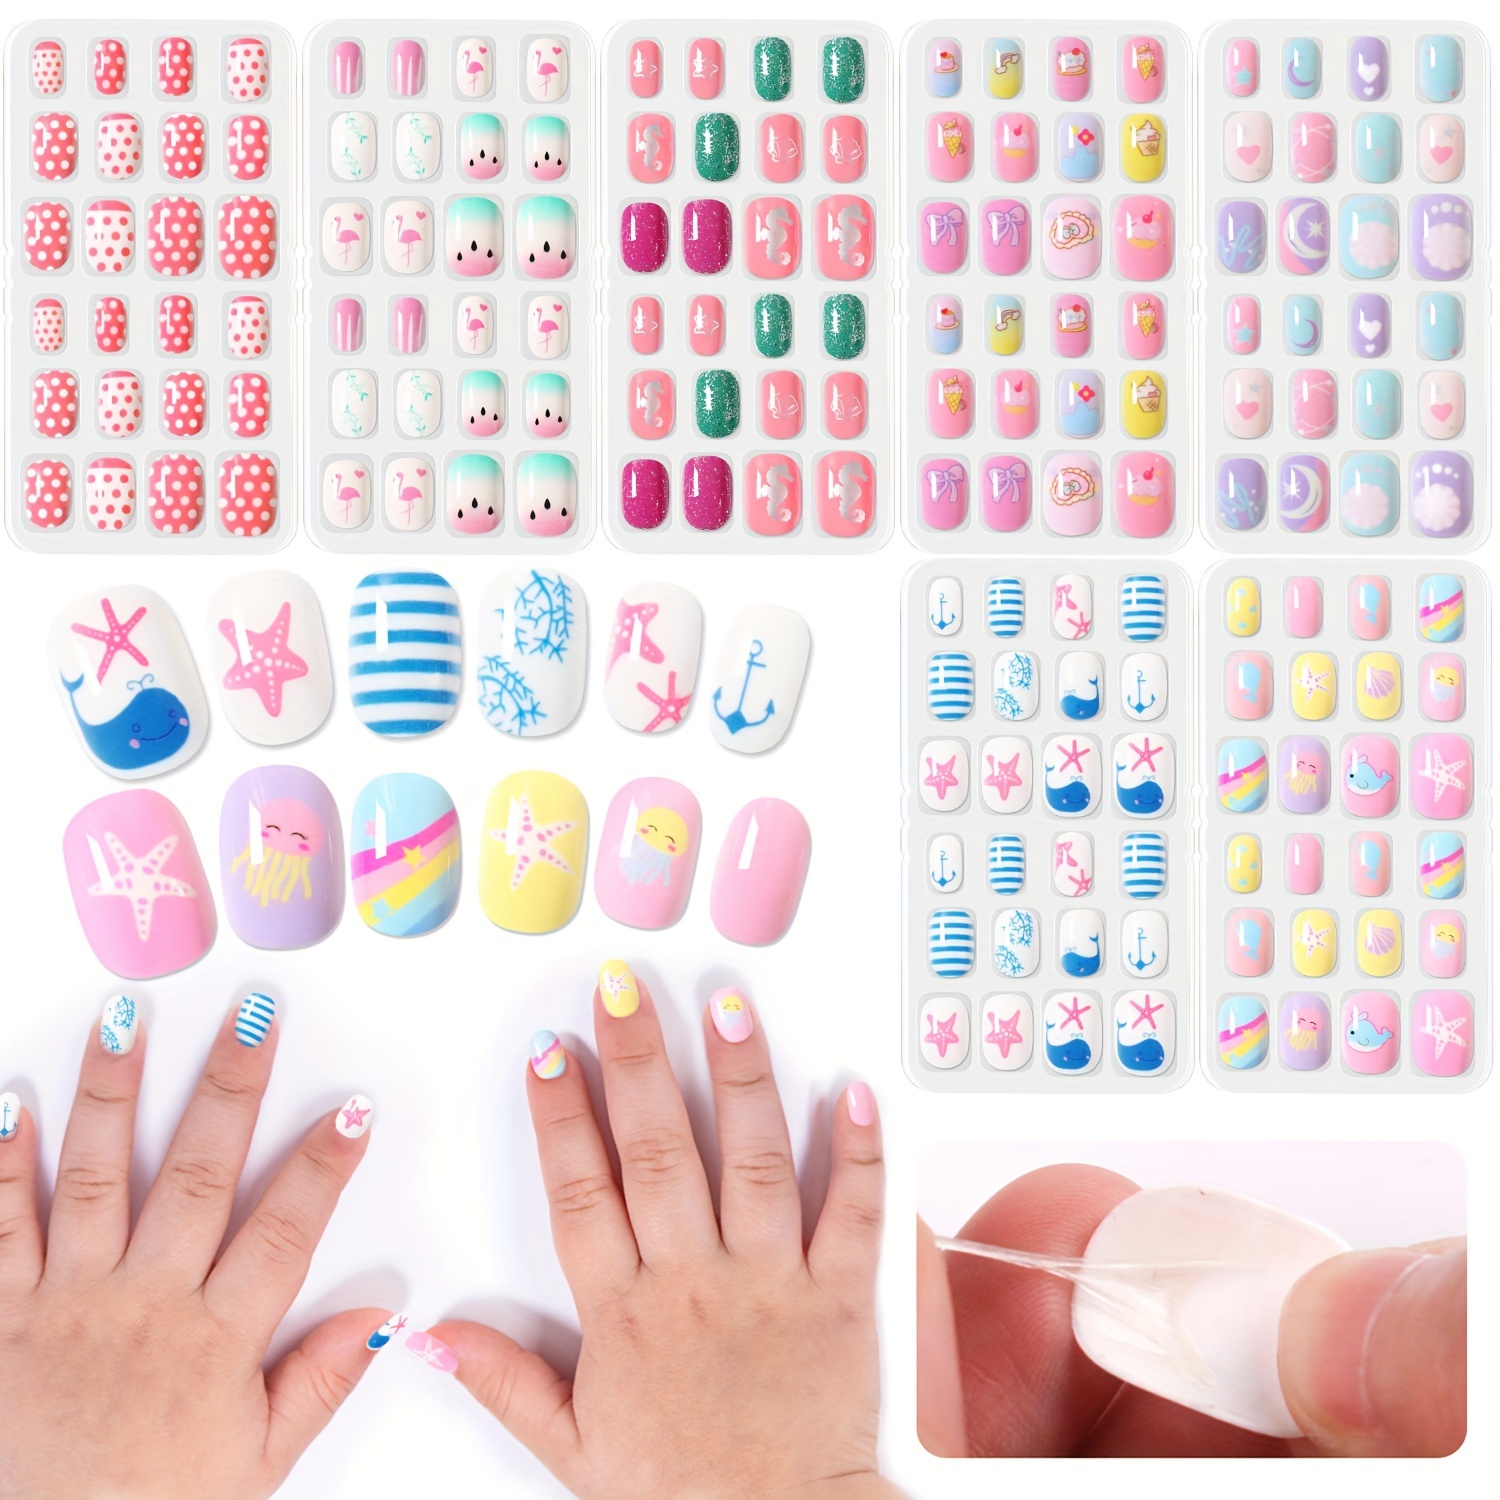 

Major Dijit 168-piece Nail Art Stickers Set - Self-adhesive, Alcohol-free, No Power Needed - Perfect For Diy Manicure & Pedicure